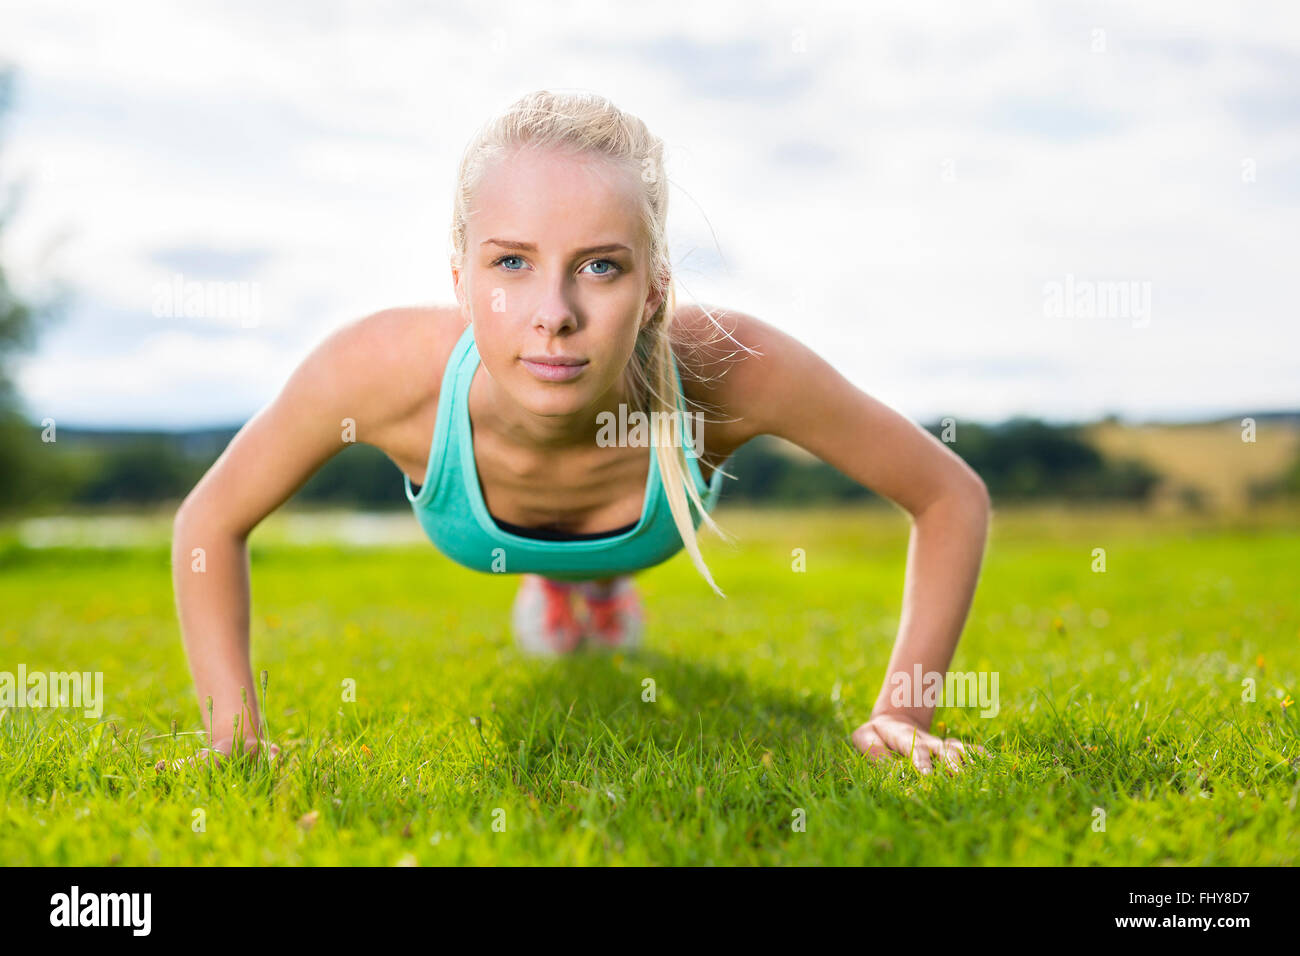 Blonde woman doing push-ups in the park Stock Photo